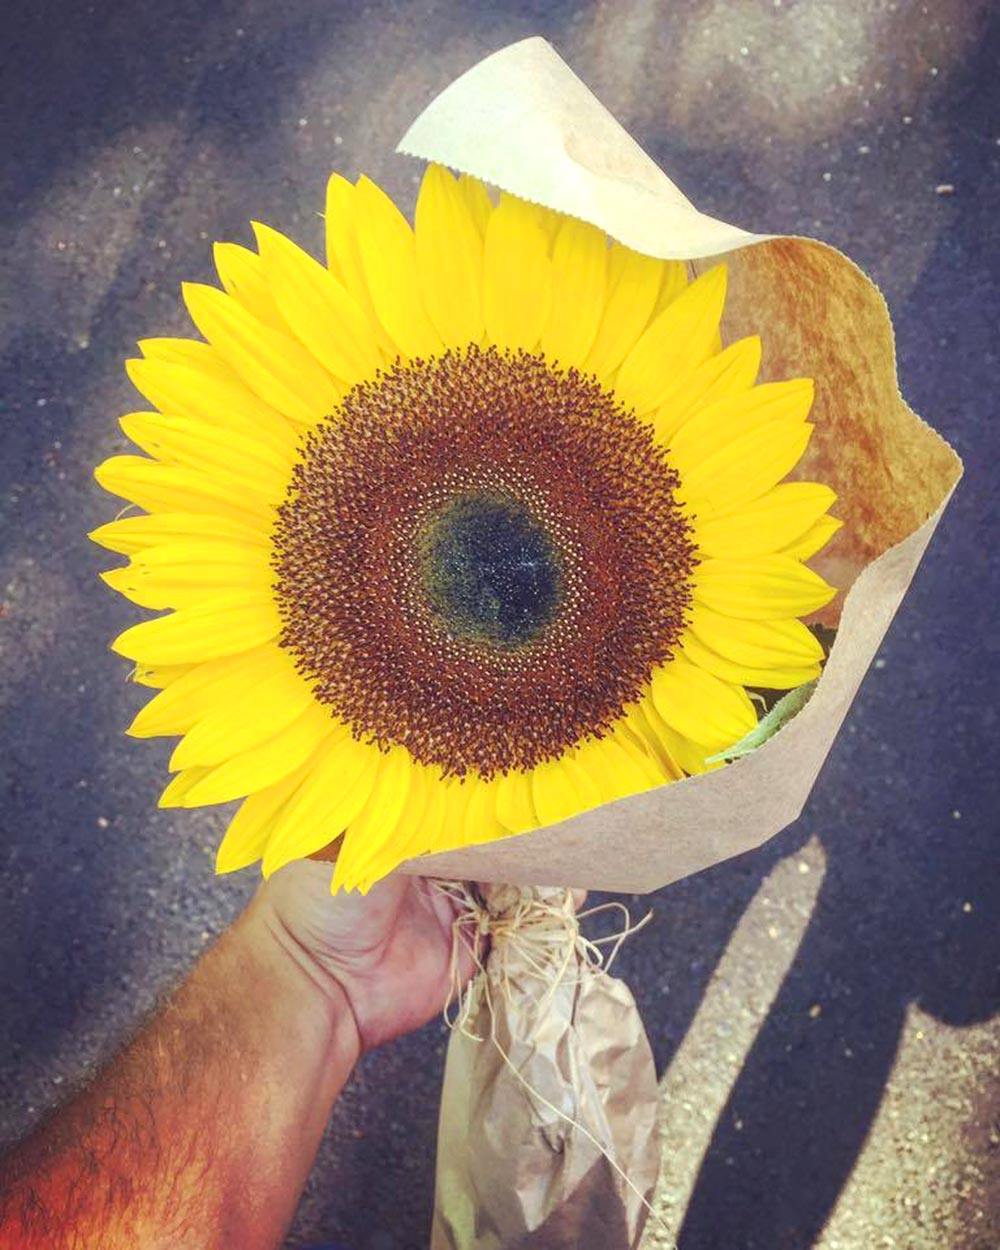 He Gave a Stronger a Sunflower Intended for Someone Else, it Changed His Life